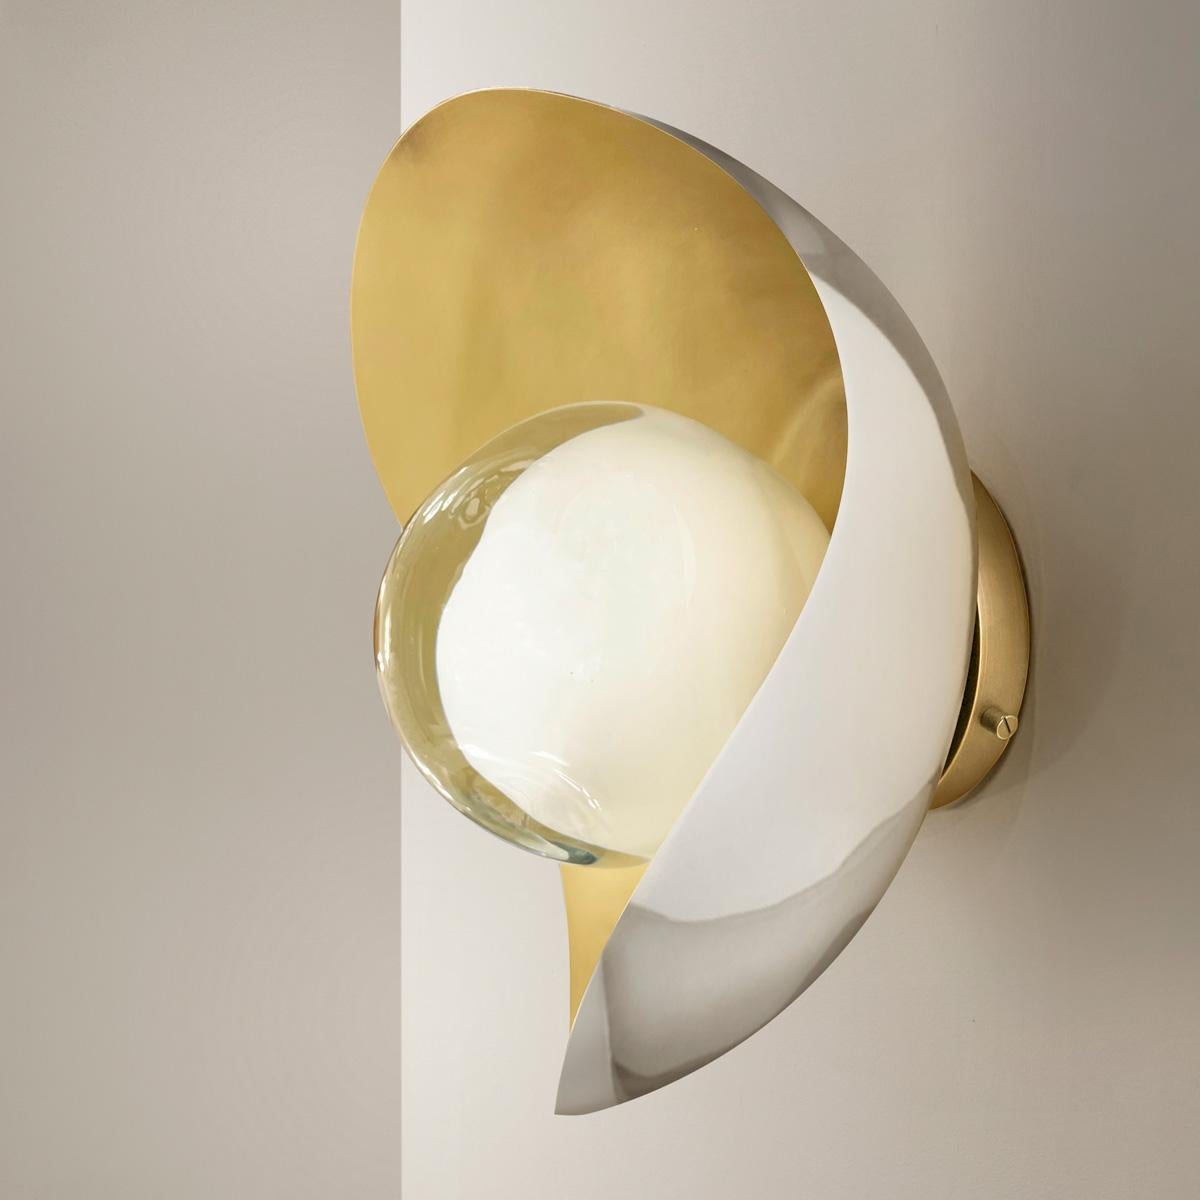 Perla Wall Light by Gaspare Asaro-Brass Finish For Sale 3